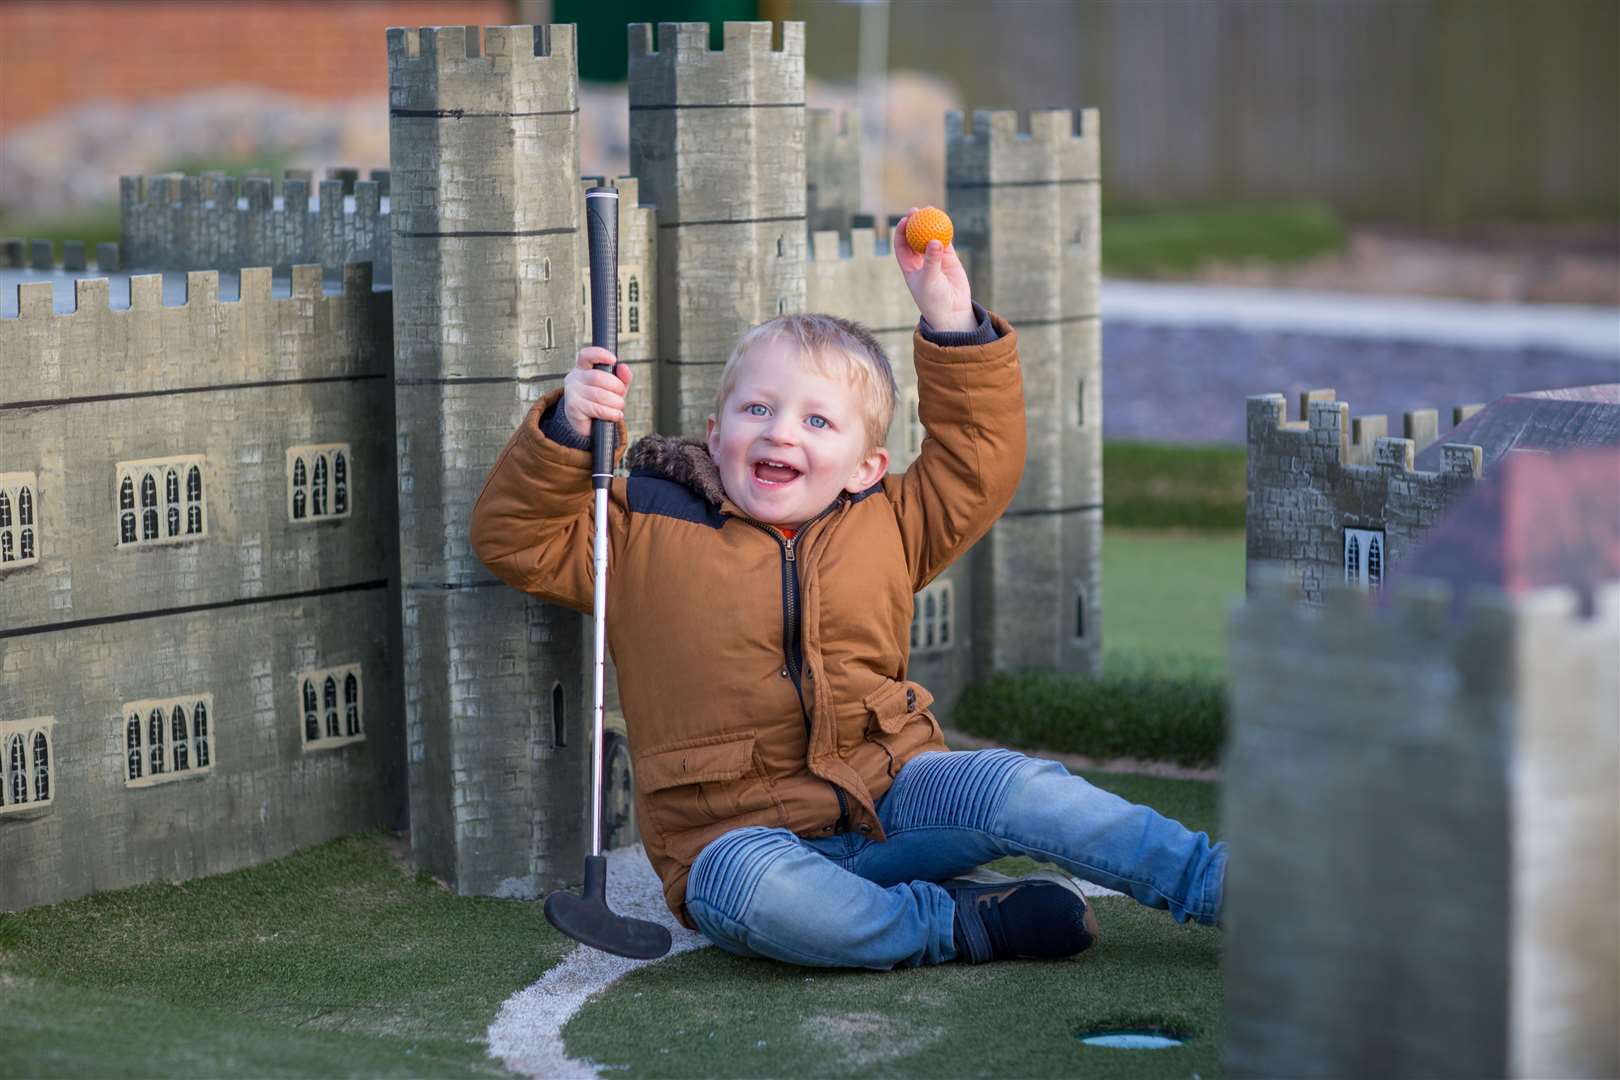 The Adventure Golf course is modelled on Leeds Castle